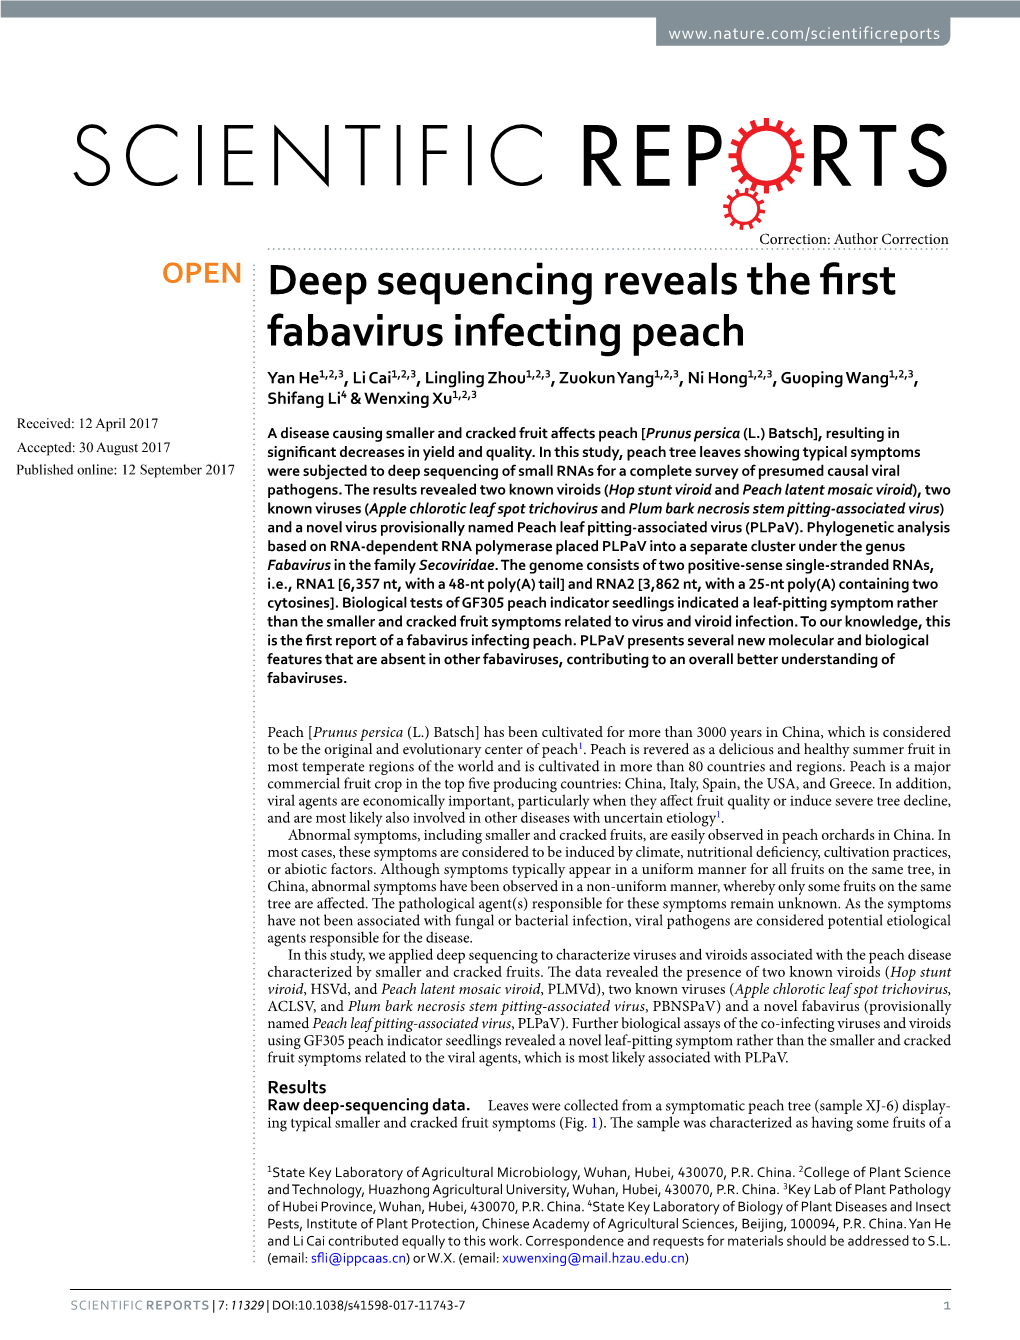 Deep Sequencing Reveals the First Fabavirus Infecting Peach